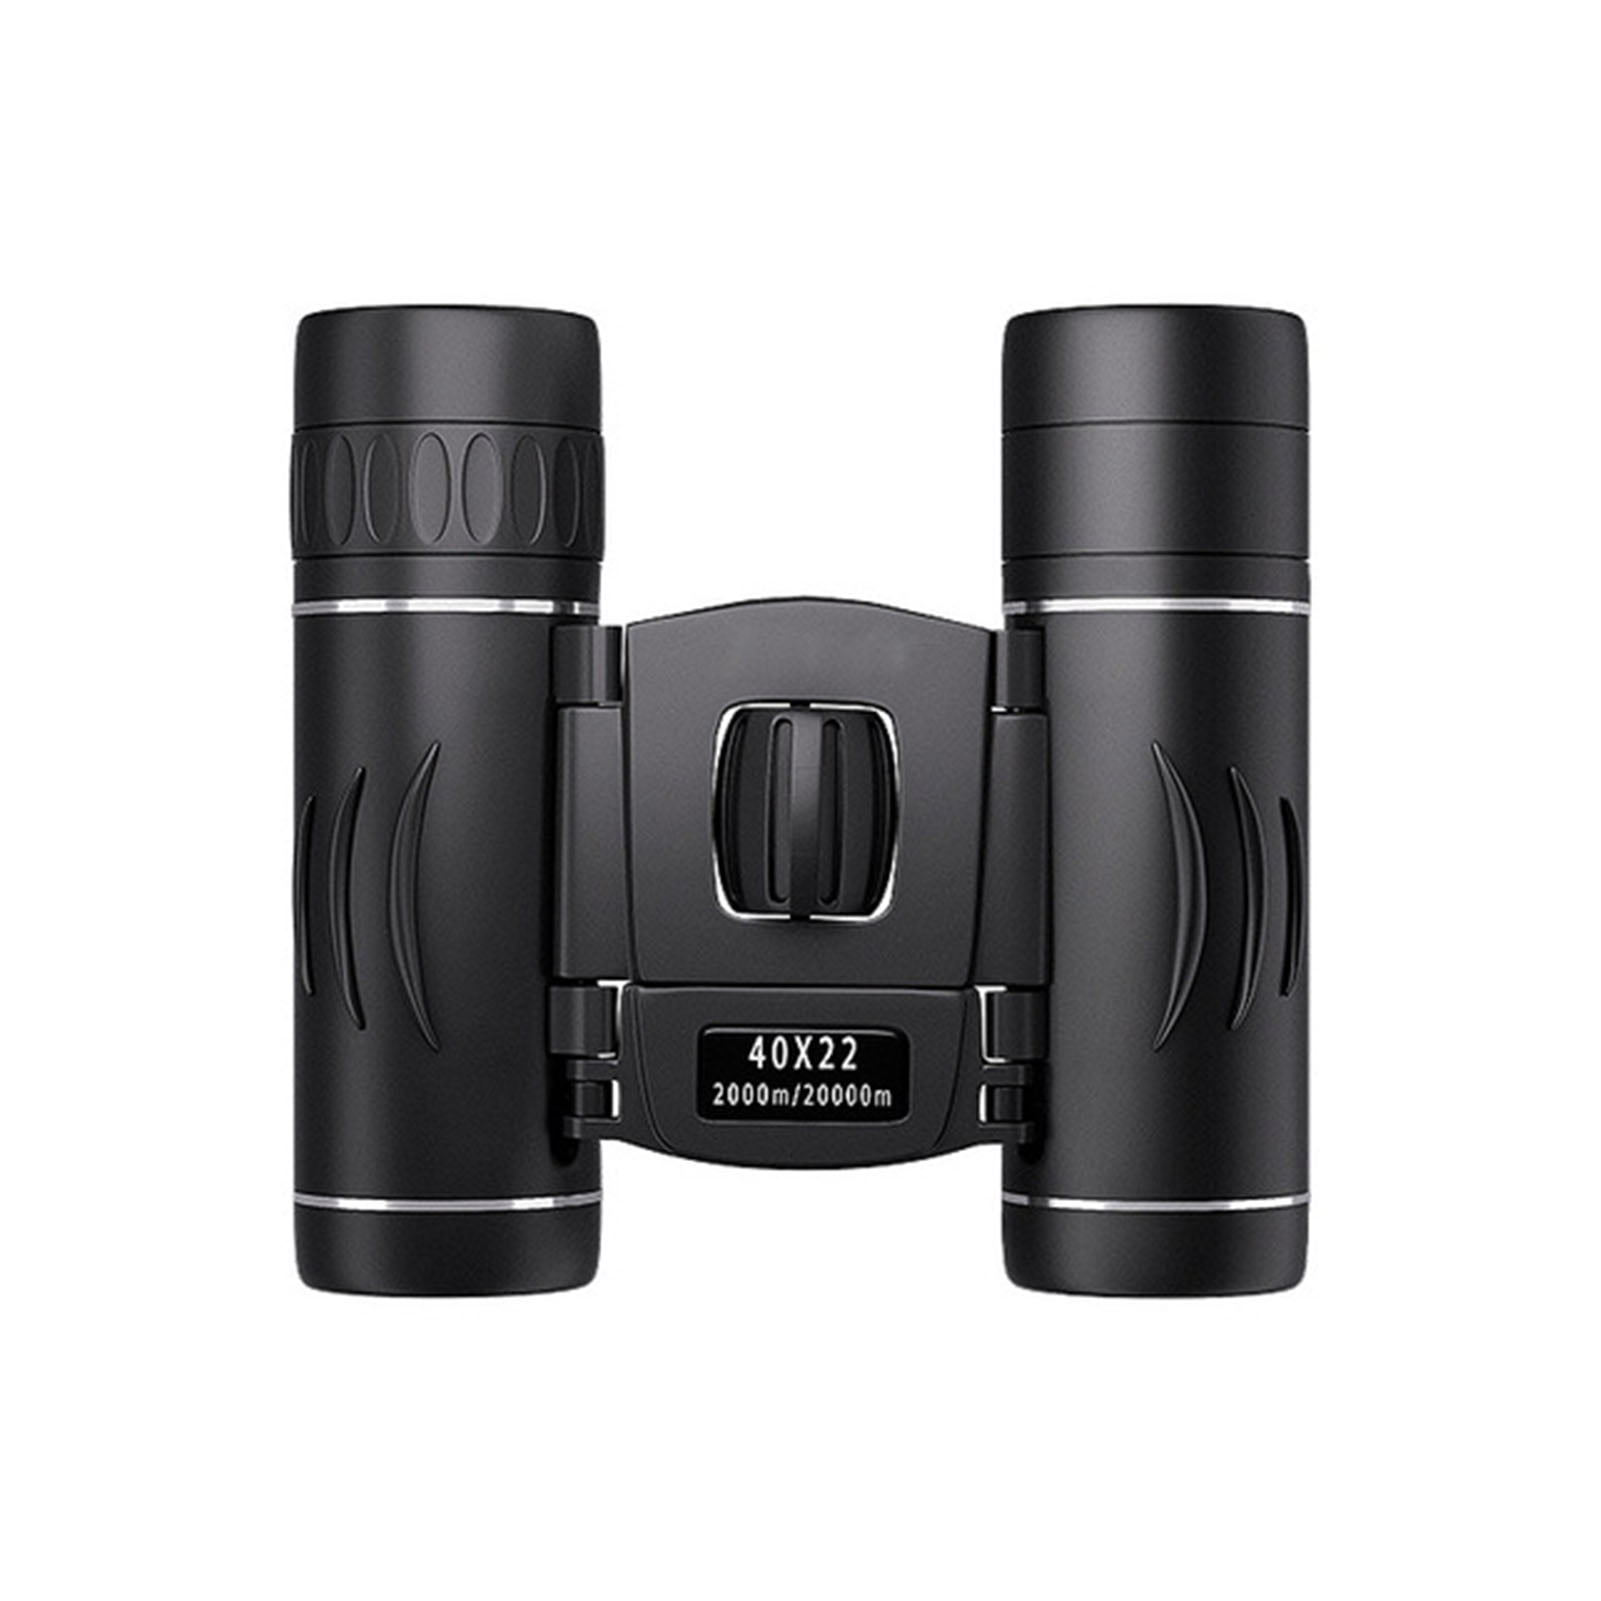 travelling Aurosports Compact Waterproof High-Powered Binoculars Telescope Perfect for Adults and kids for outdoor birding hunting etc sightseeing 